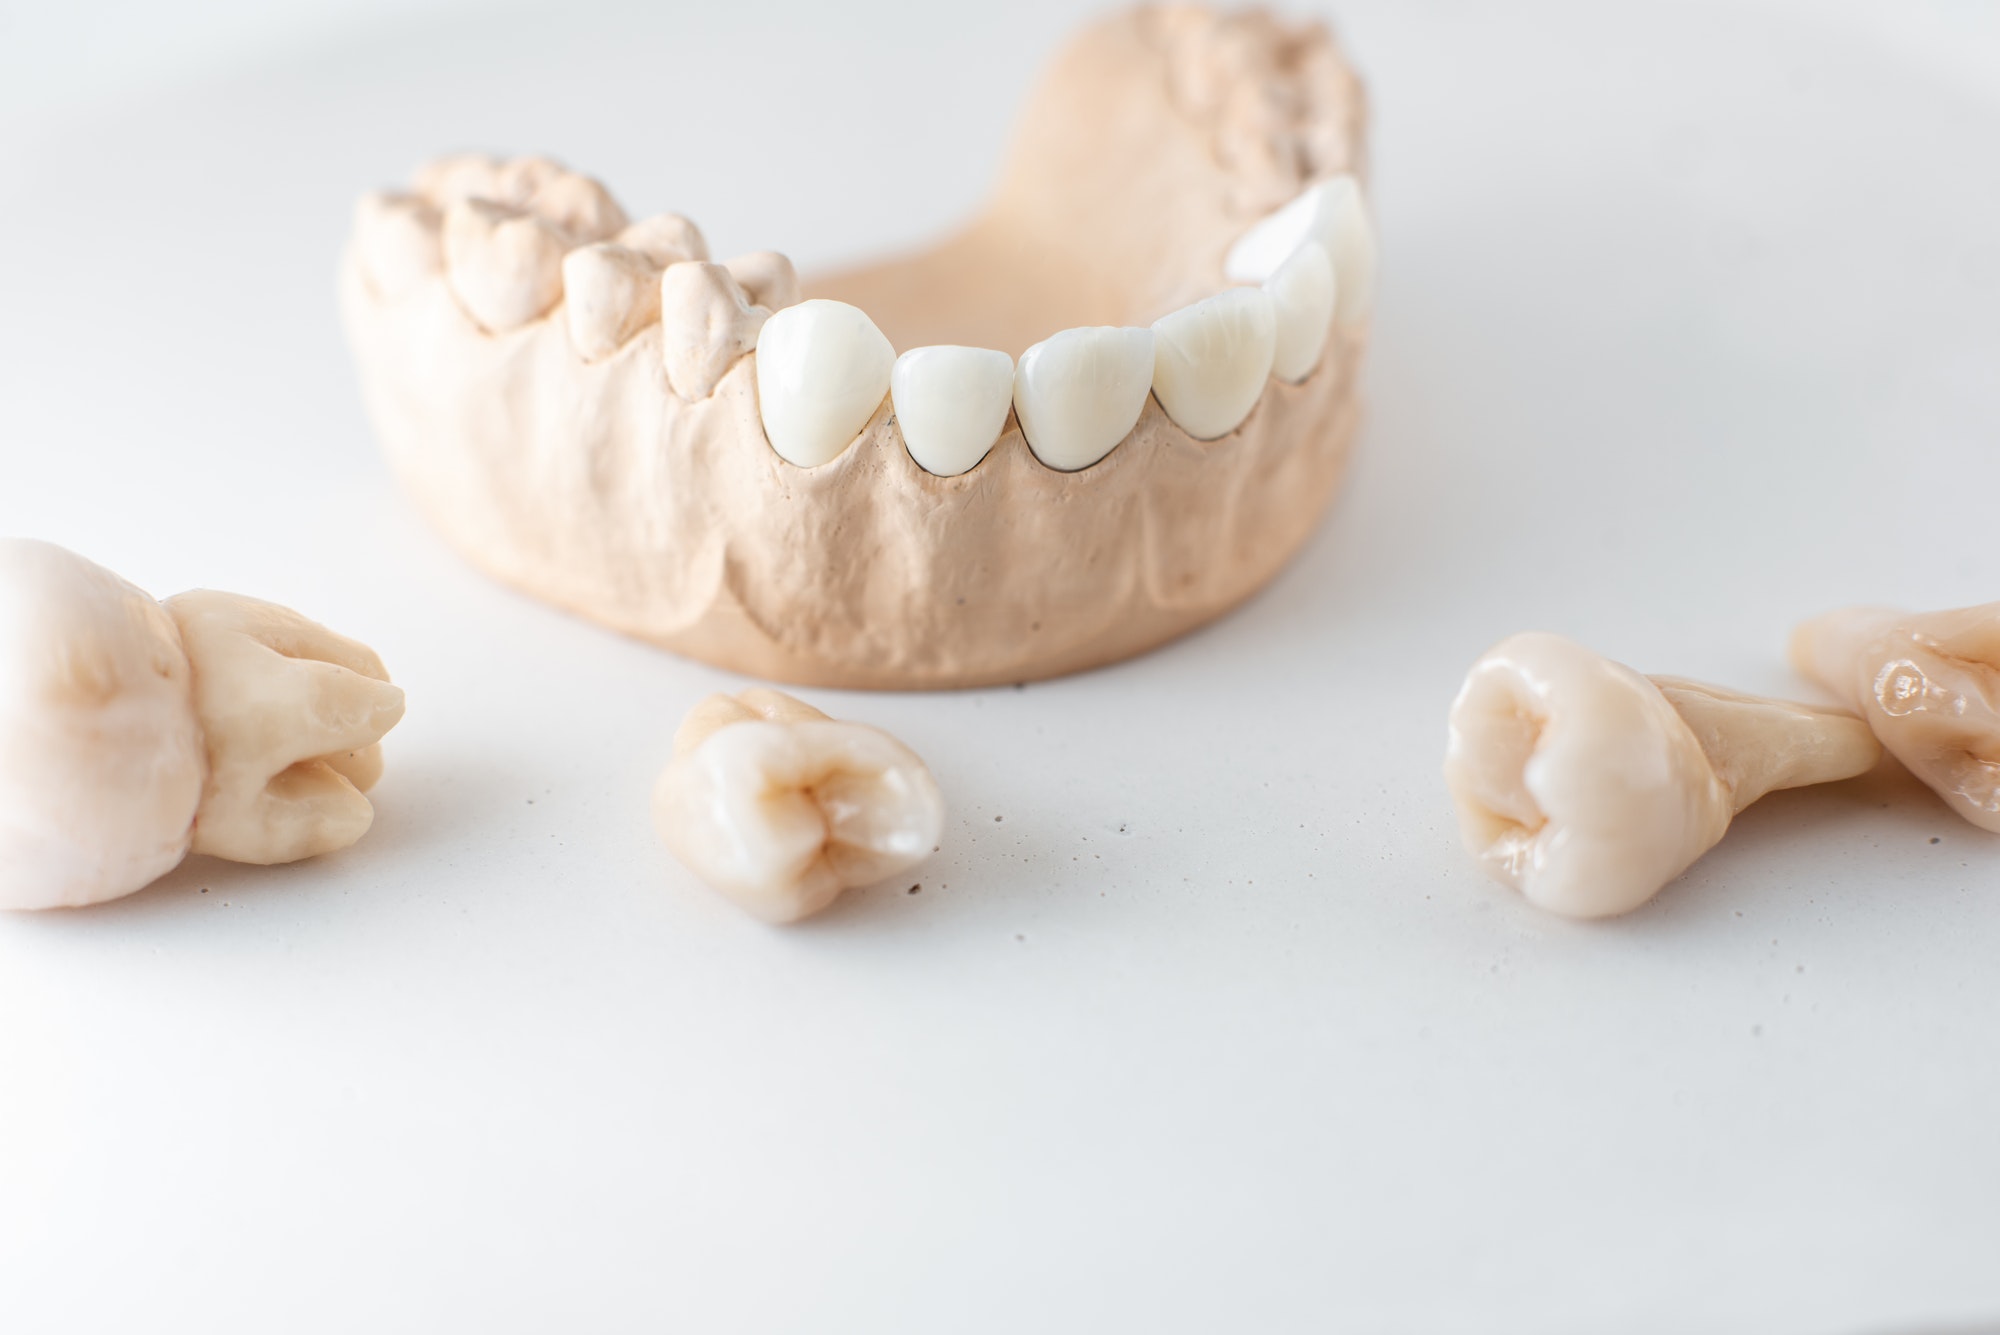 Model of artificial jaw with teeth